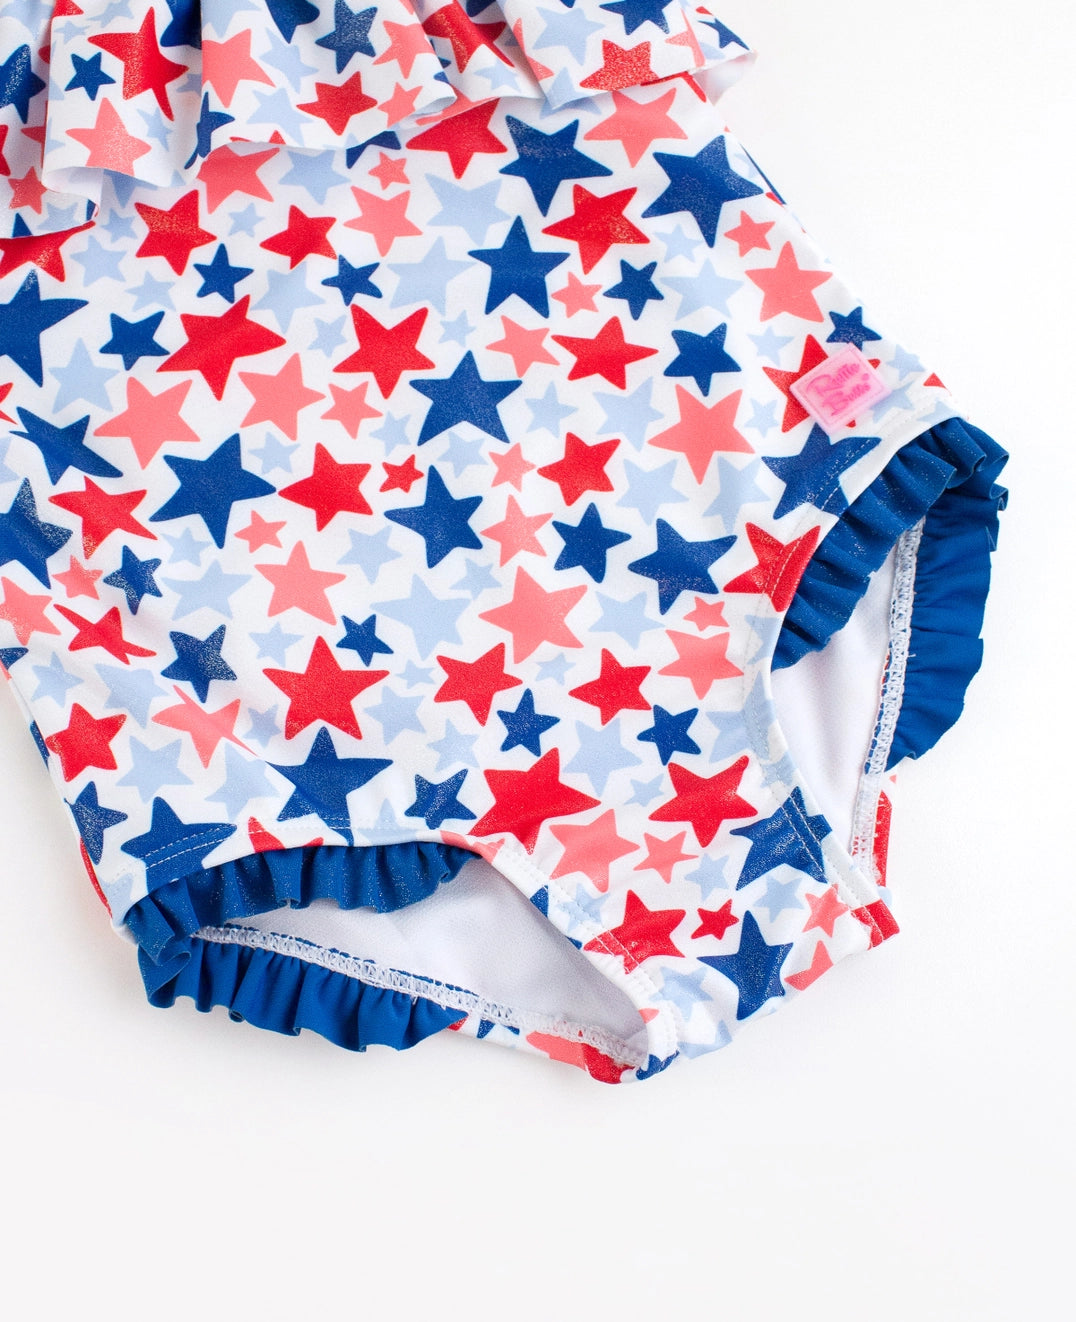 Star Spangled Shoulder Ruffle One Piece Suit